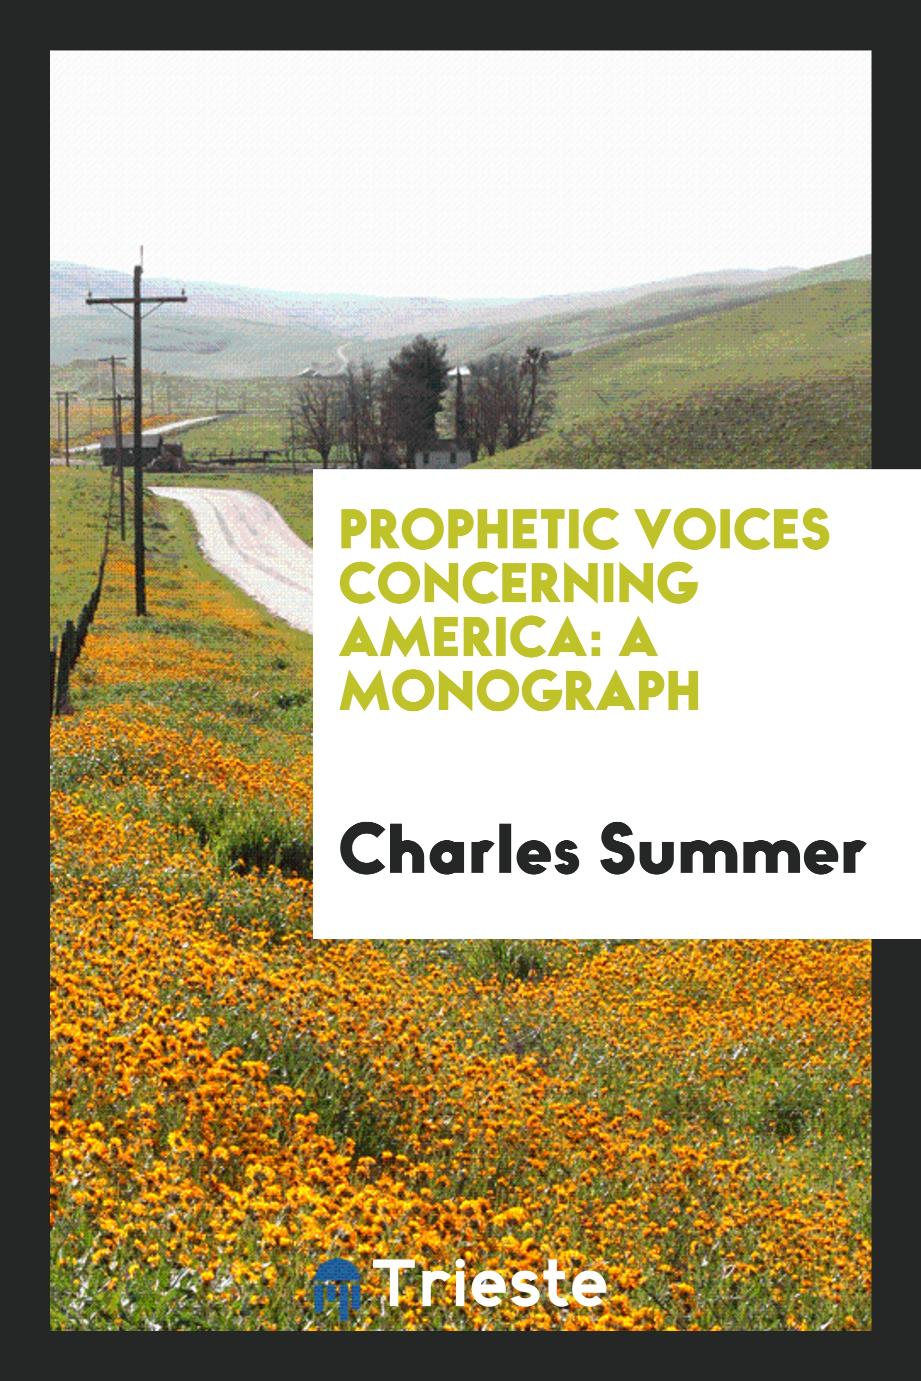 Prophetic voices concerning America: a monograph